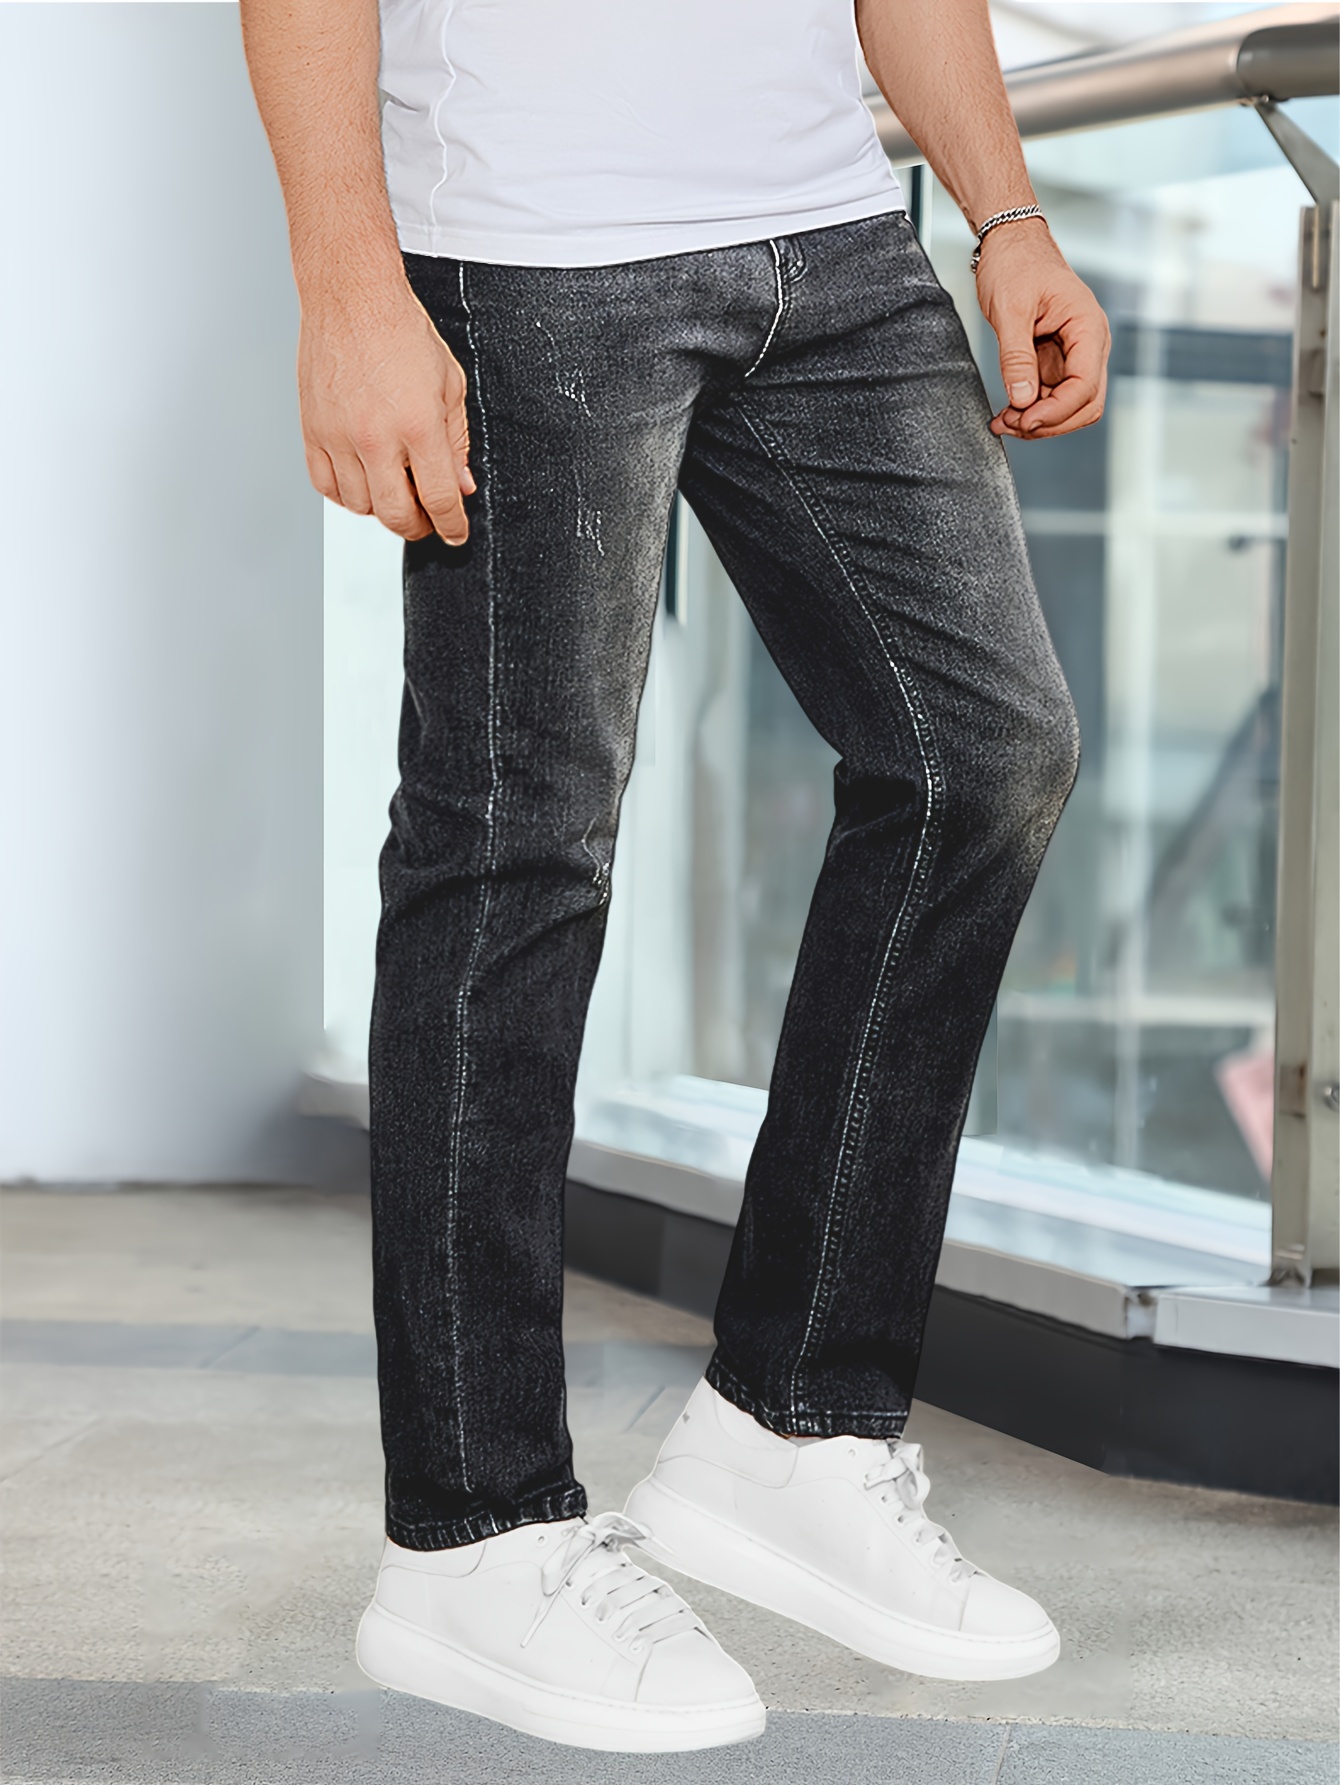 Men's regular fit faded jeans-Men's regular jeans-casual jeans-classic  style